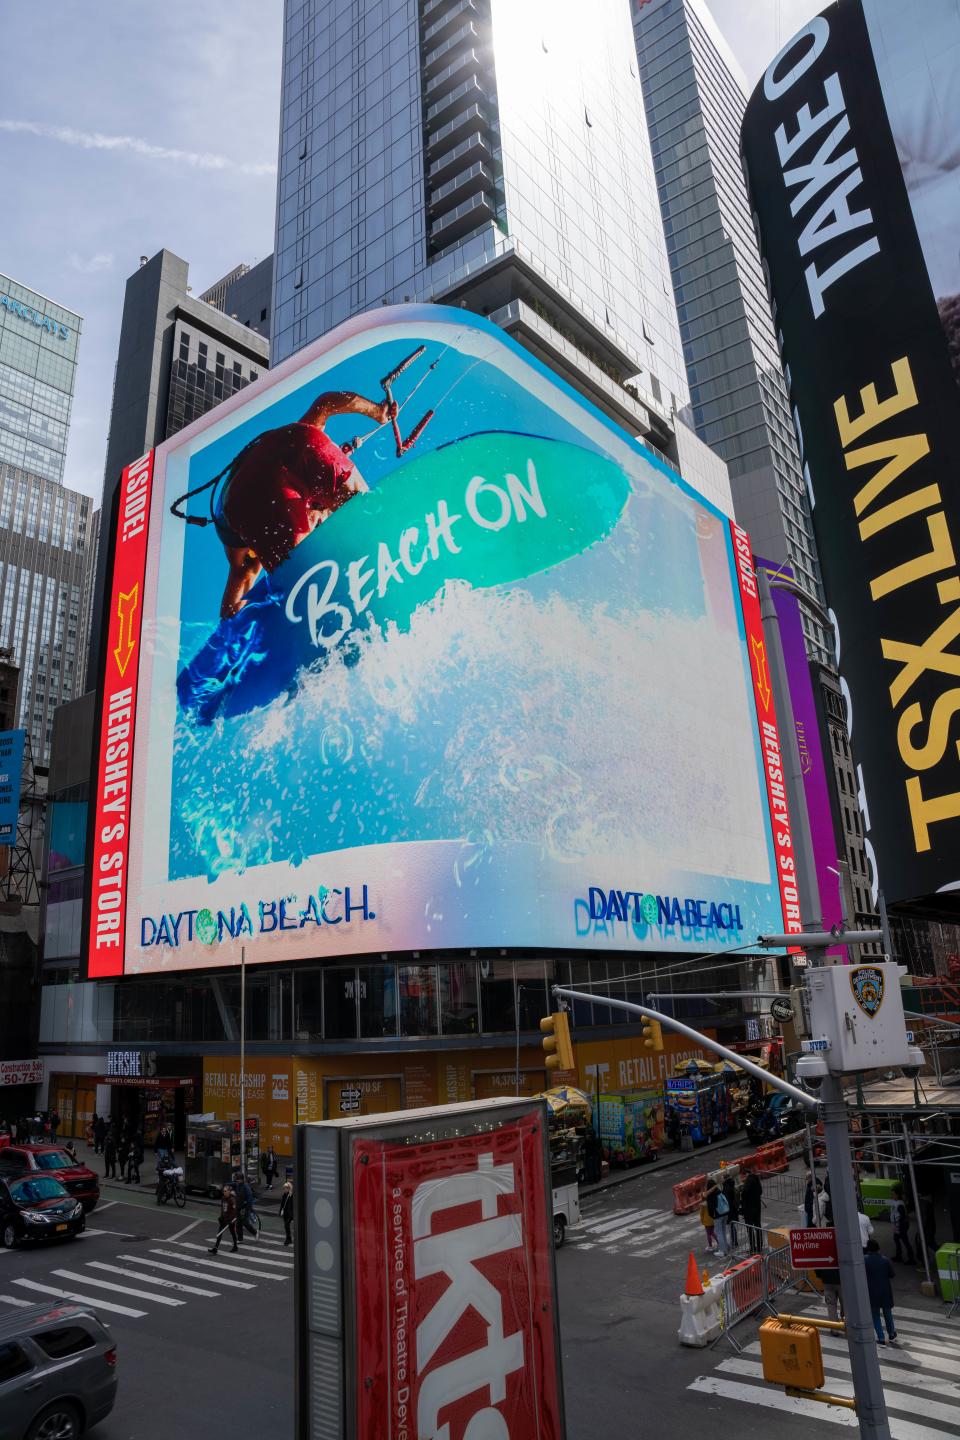 A look at the new 3D anamorphic video ad for Daytona Beach now showing in New York's Times Square.